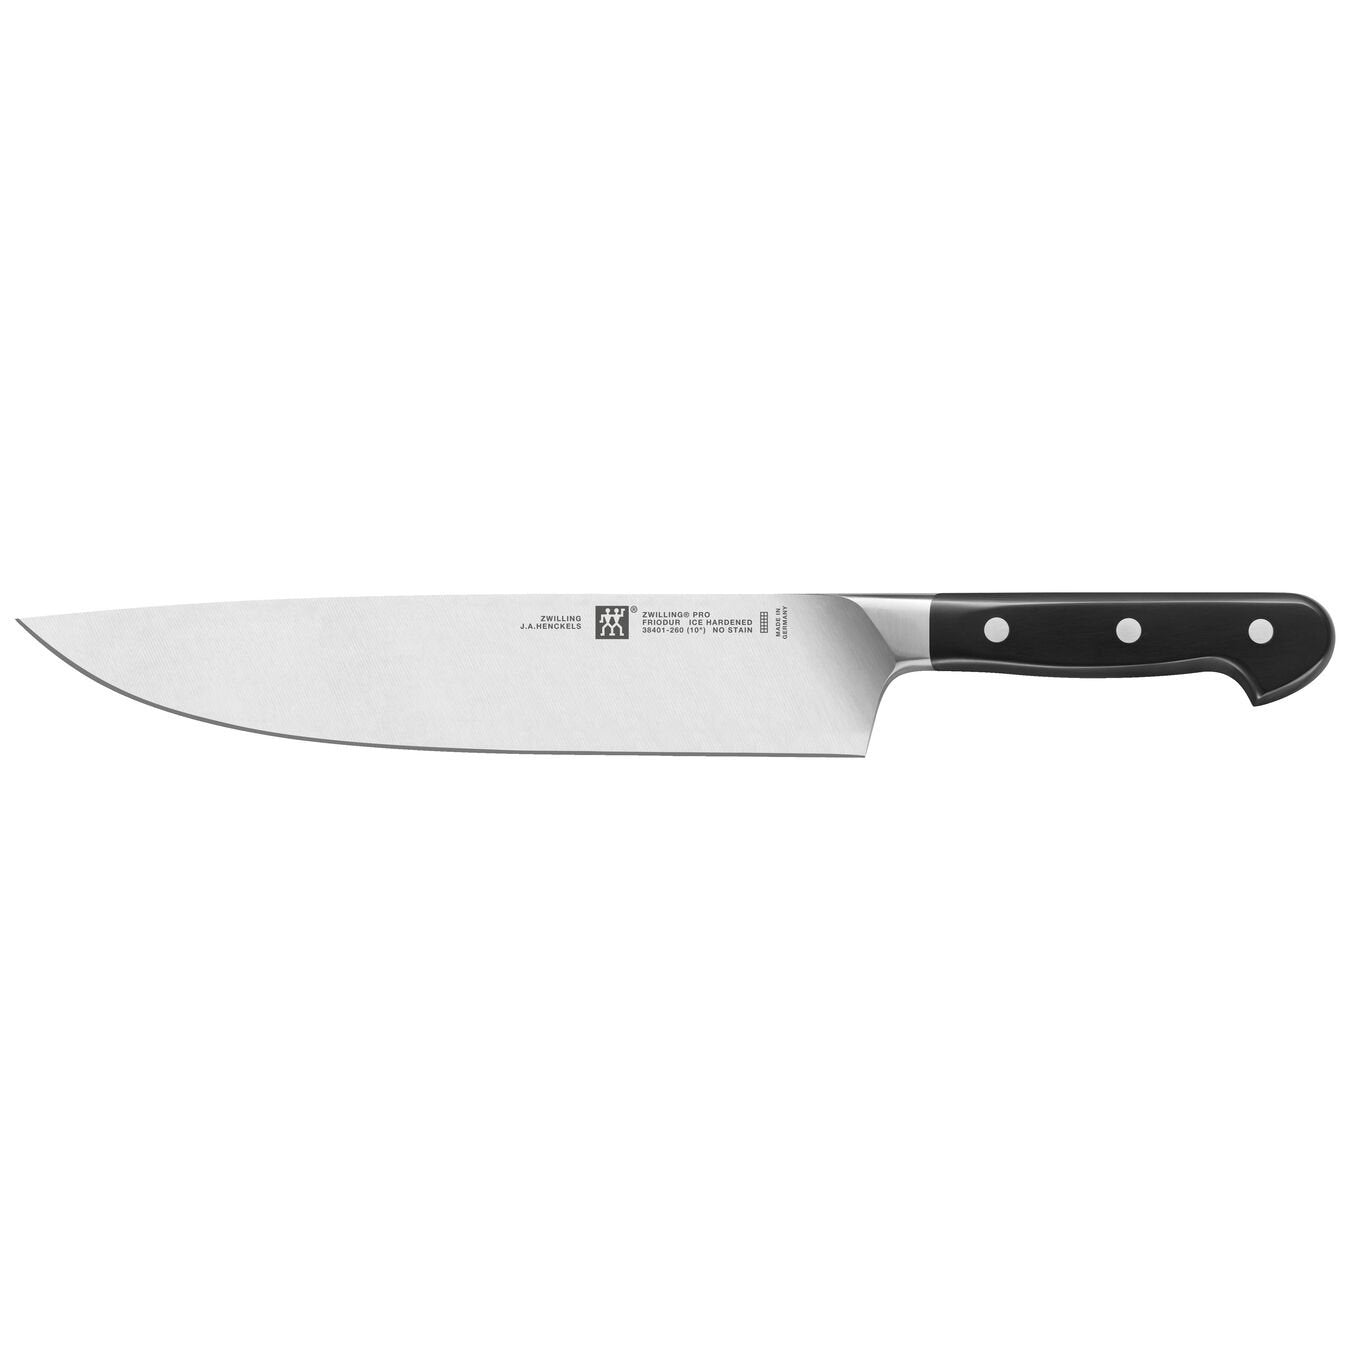 long kitchen knife with riveted black handle on white background